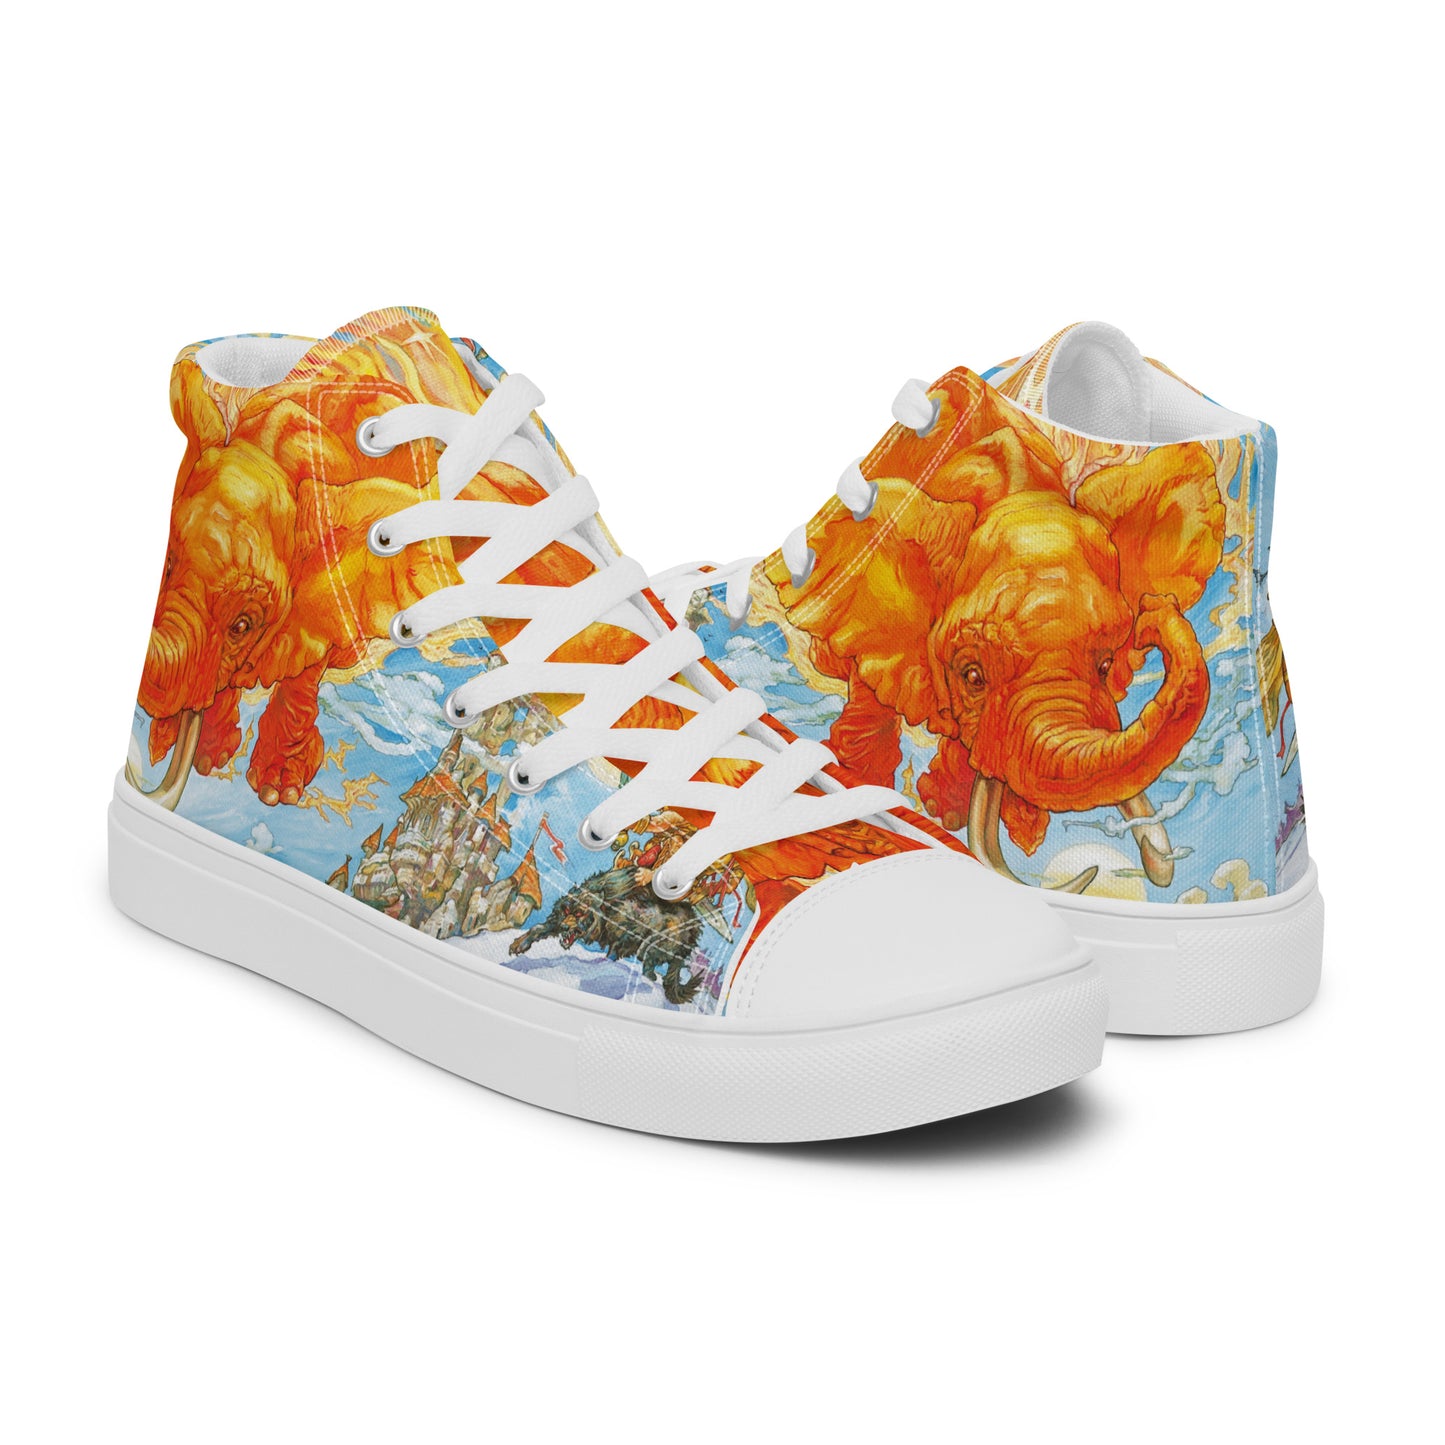 Men’s Fifth Elephant High Top Canvas Shoes - Free Shipping *US SIZES SHOWN! USE CHART!